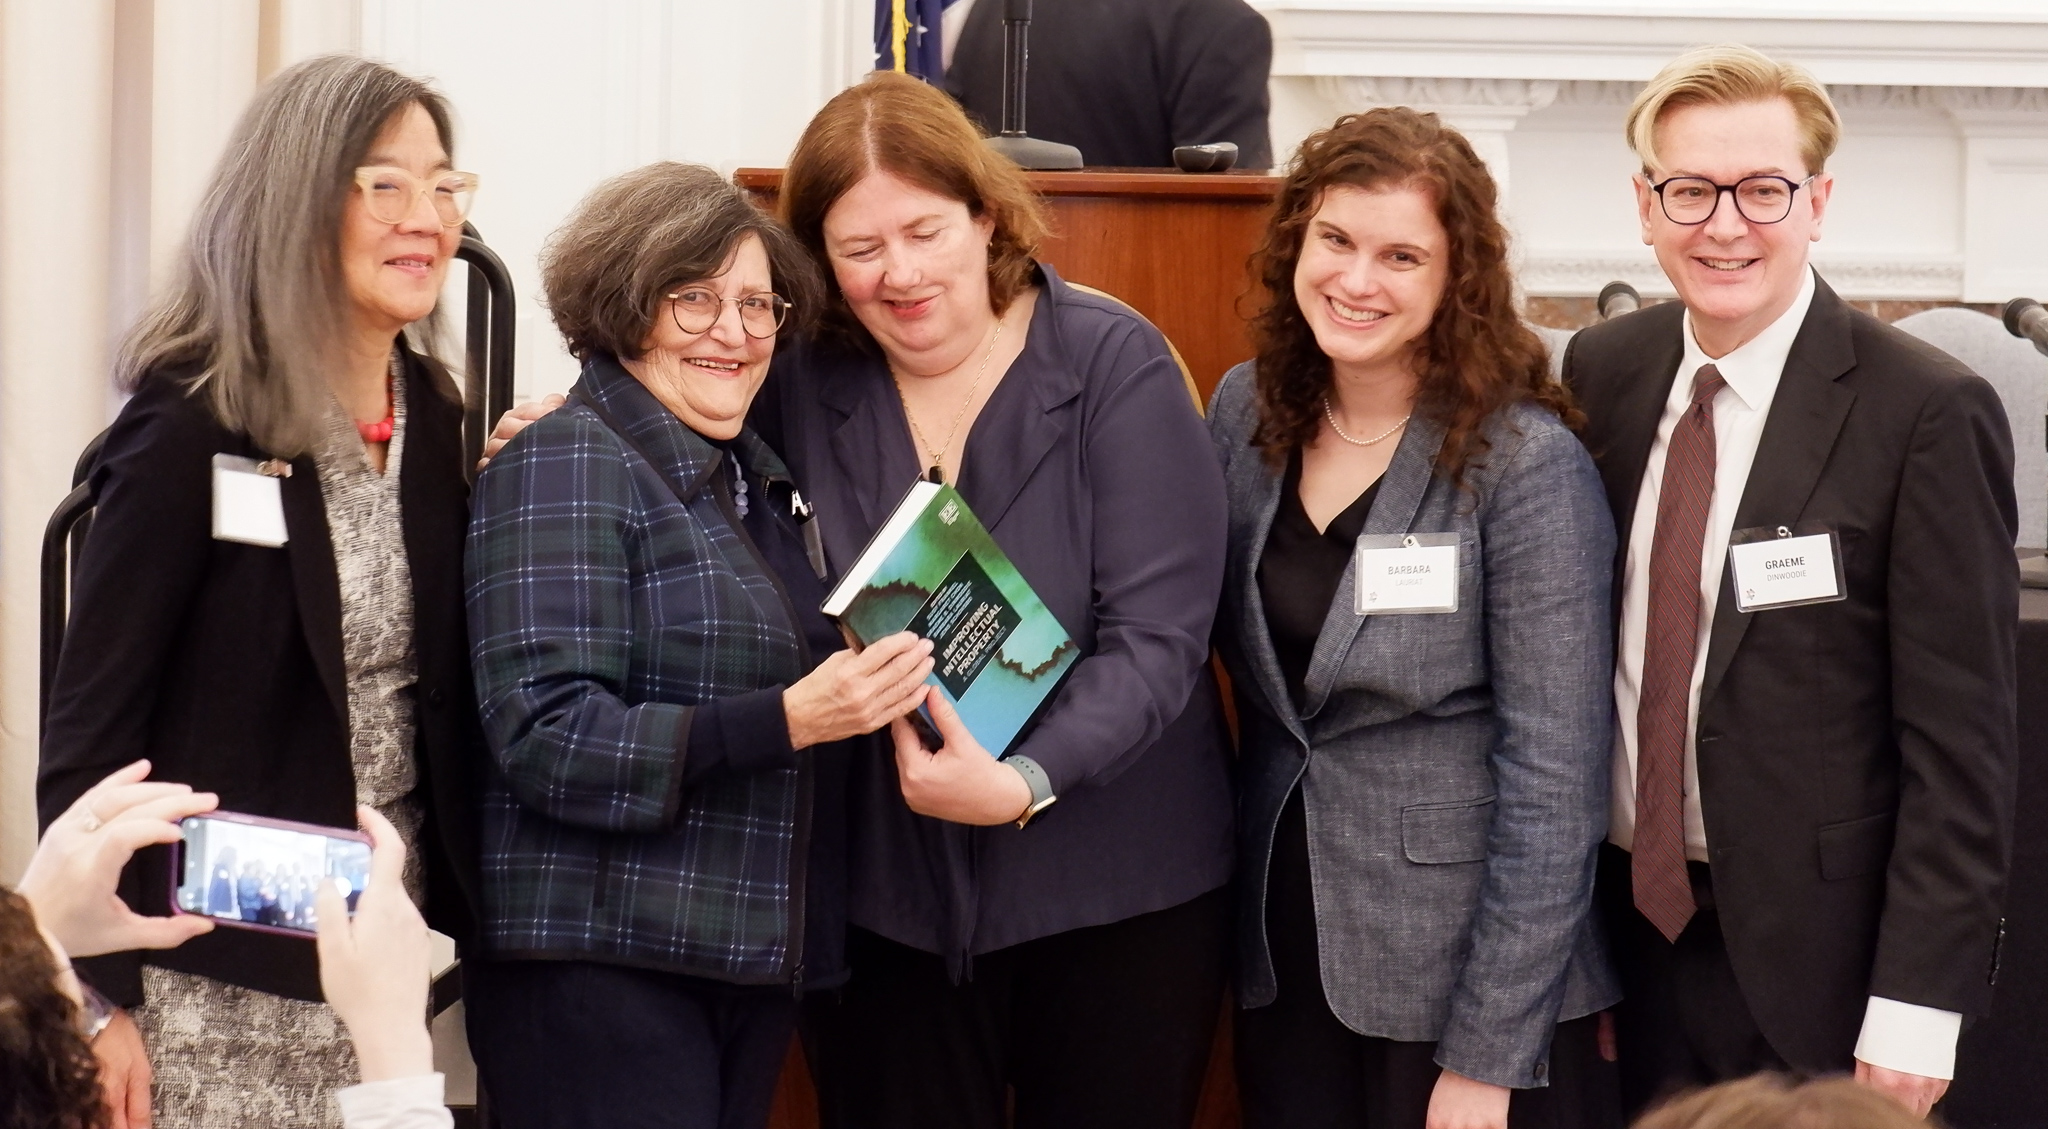 Professors Margaret Chon, Susy Frankel, Barbara Lauriat. and Graeme B. Dinwoodie present Professor Dreyfuss with the book Improving Intellectual Property